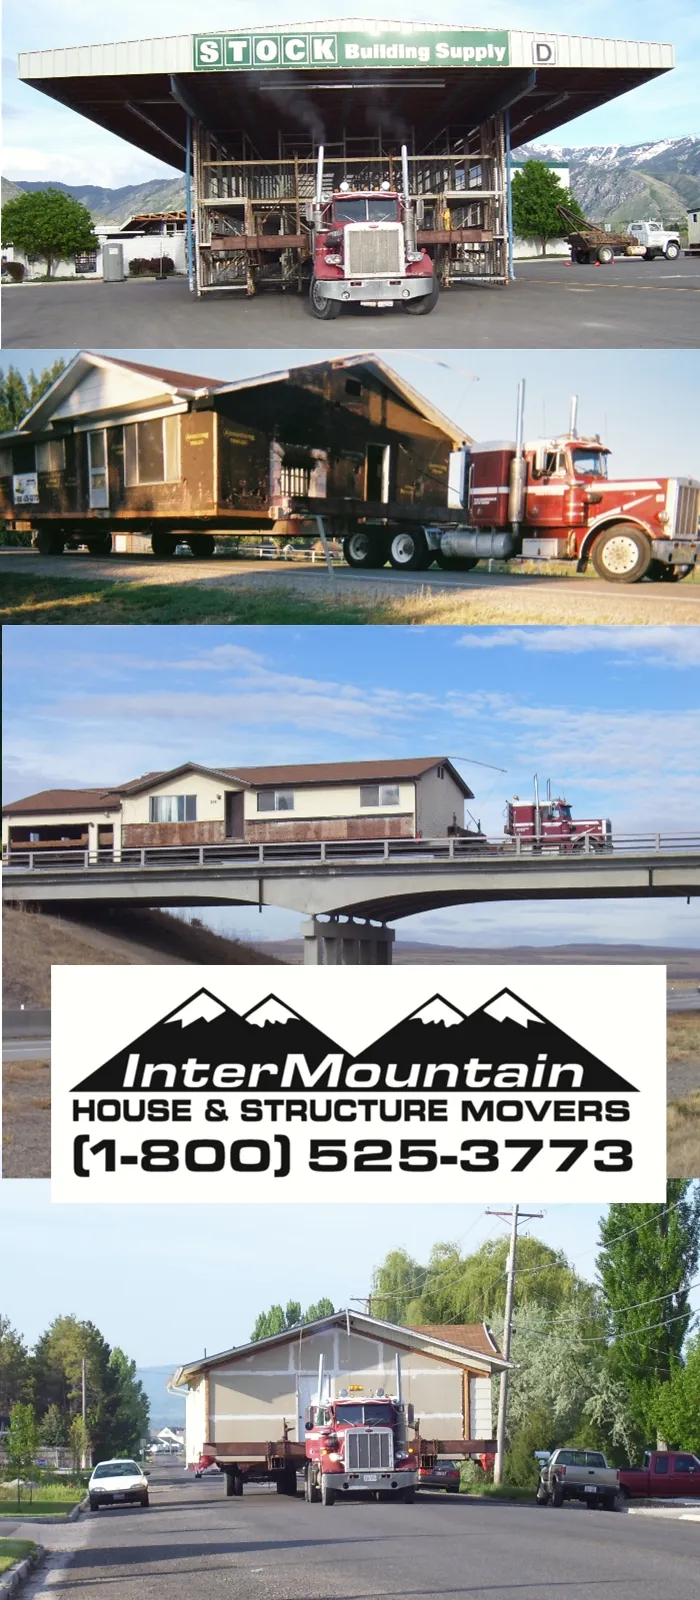 Intermountain House and Structure Movers logo